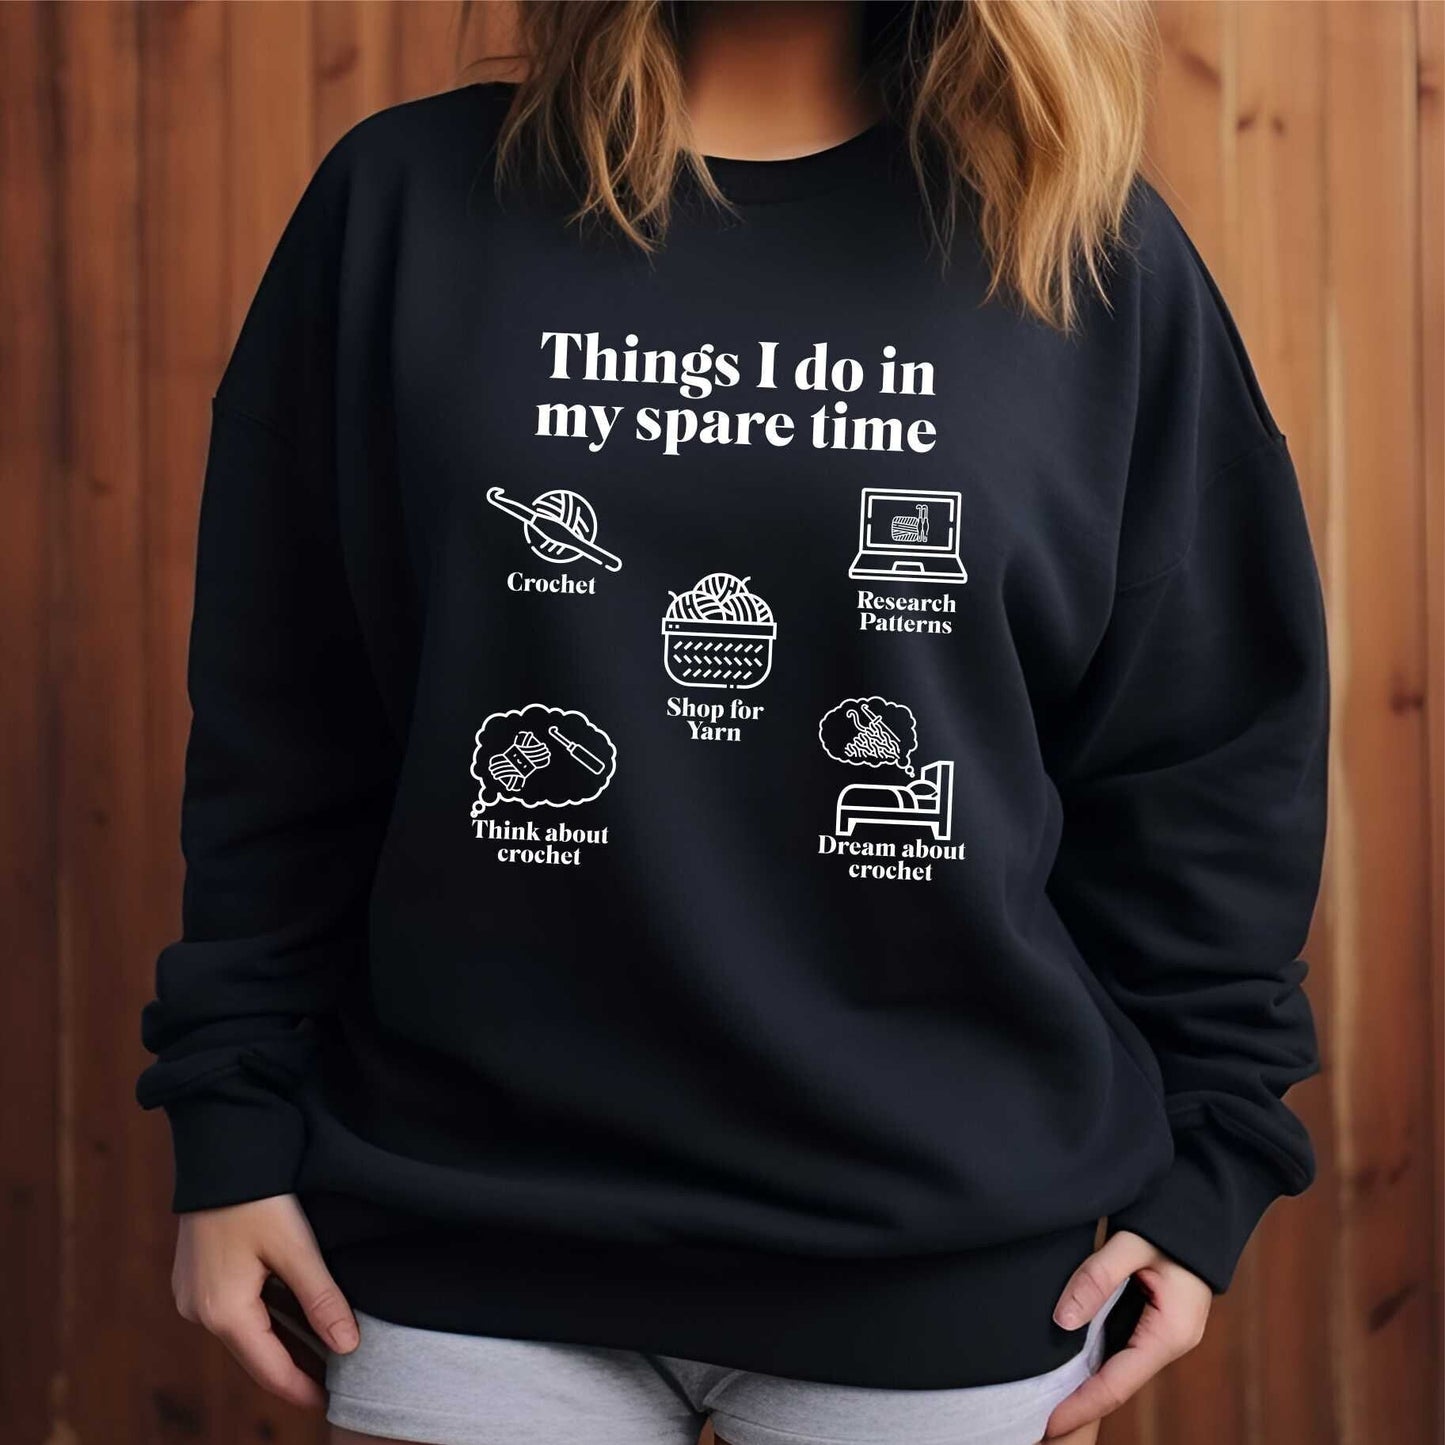 Crochet sweatshirt, Grandma Sweater Things I do in my spare time shirt, Crochet humor gift for her hard to buy for present, crewneck - SBS T Shop